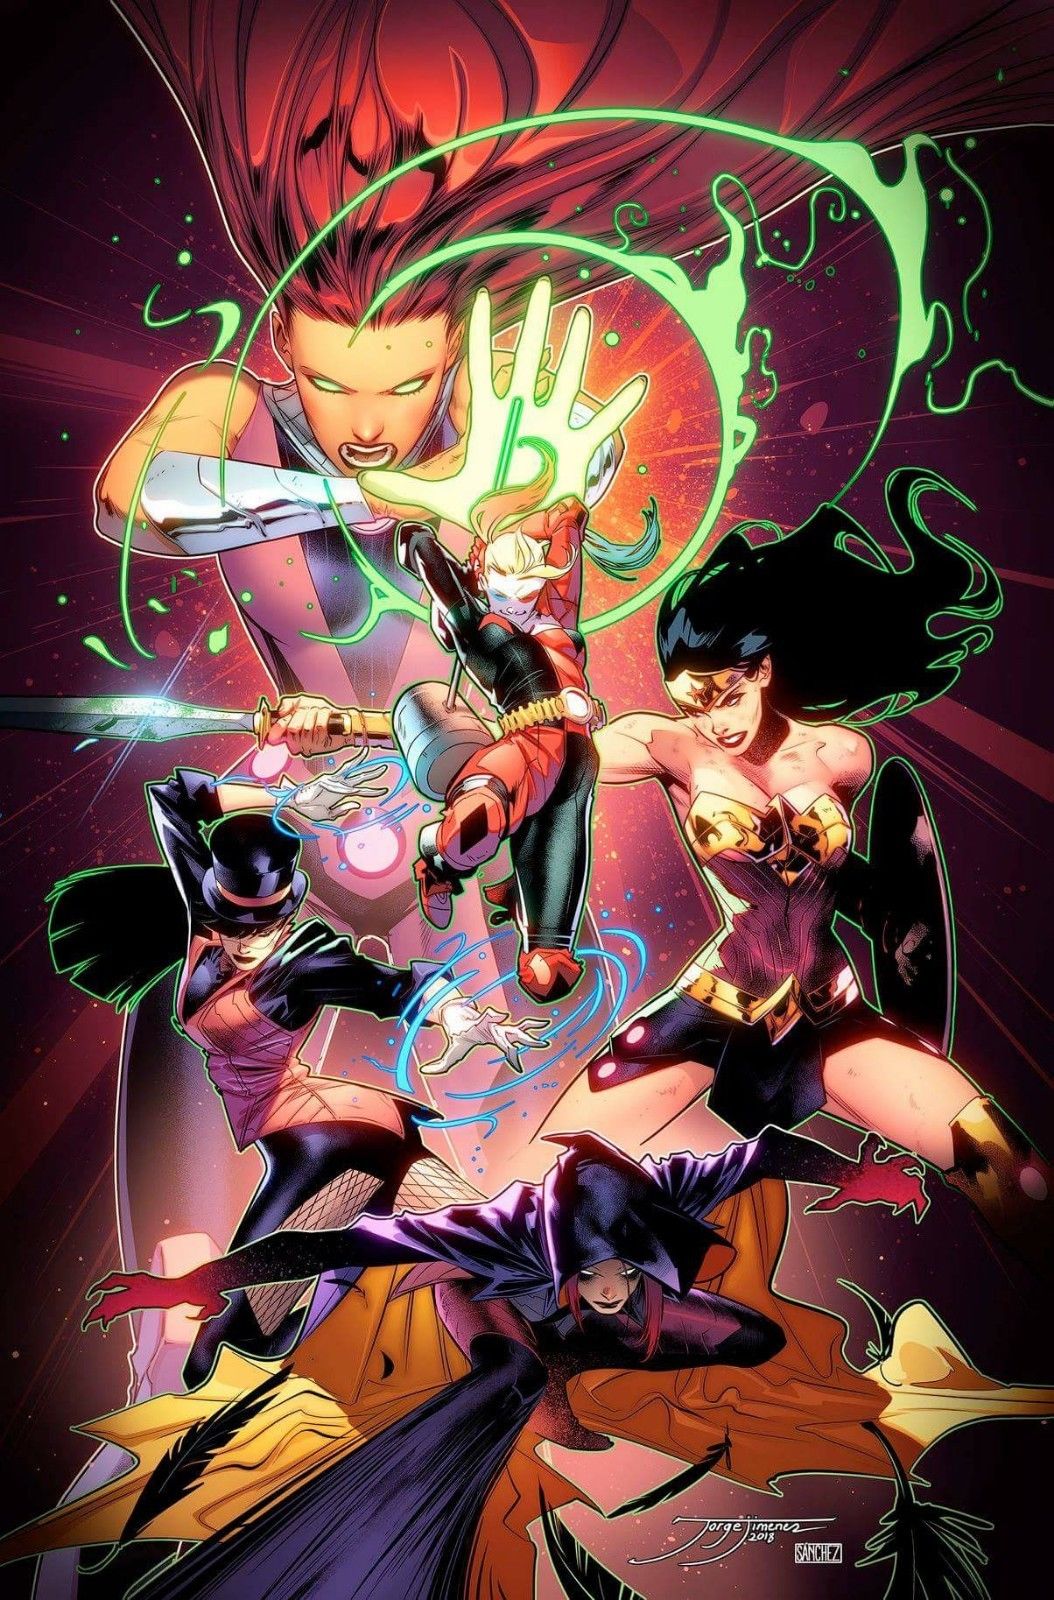 DC NATION #0 JLA 1:500 INCENTIVE VARIANT COVER 05/02/18 RELEASE DATE